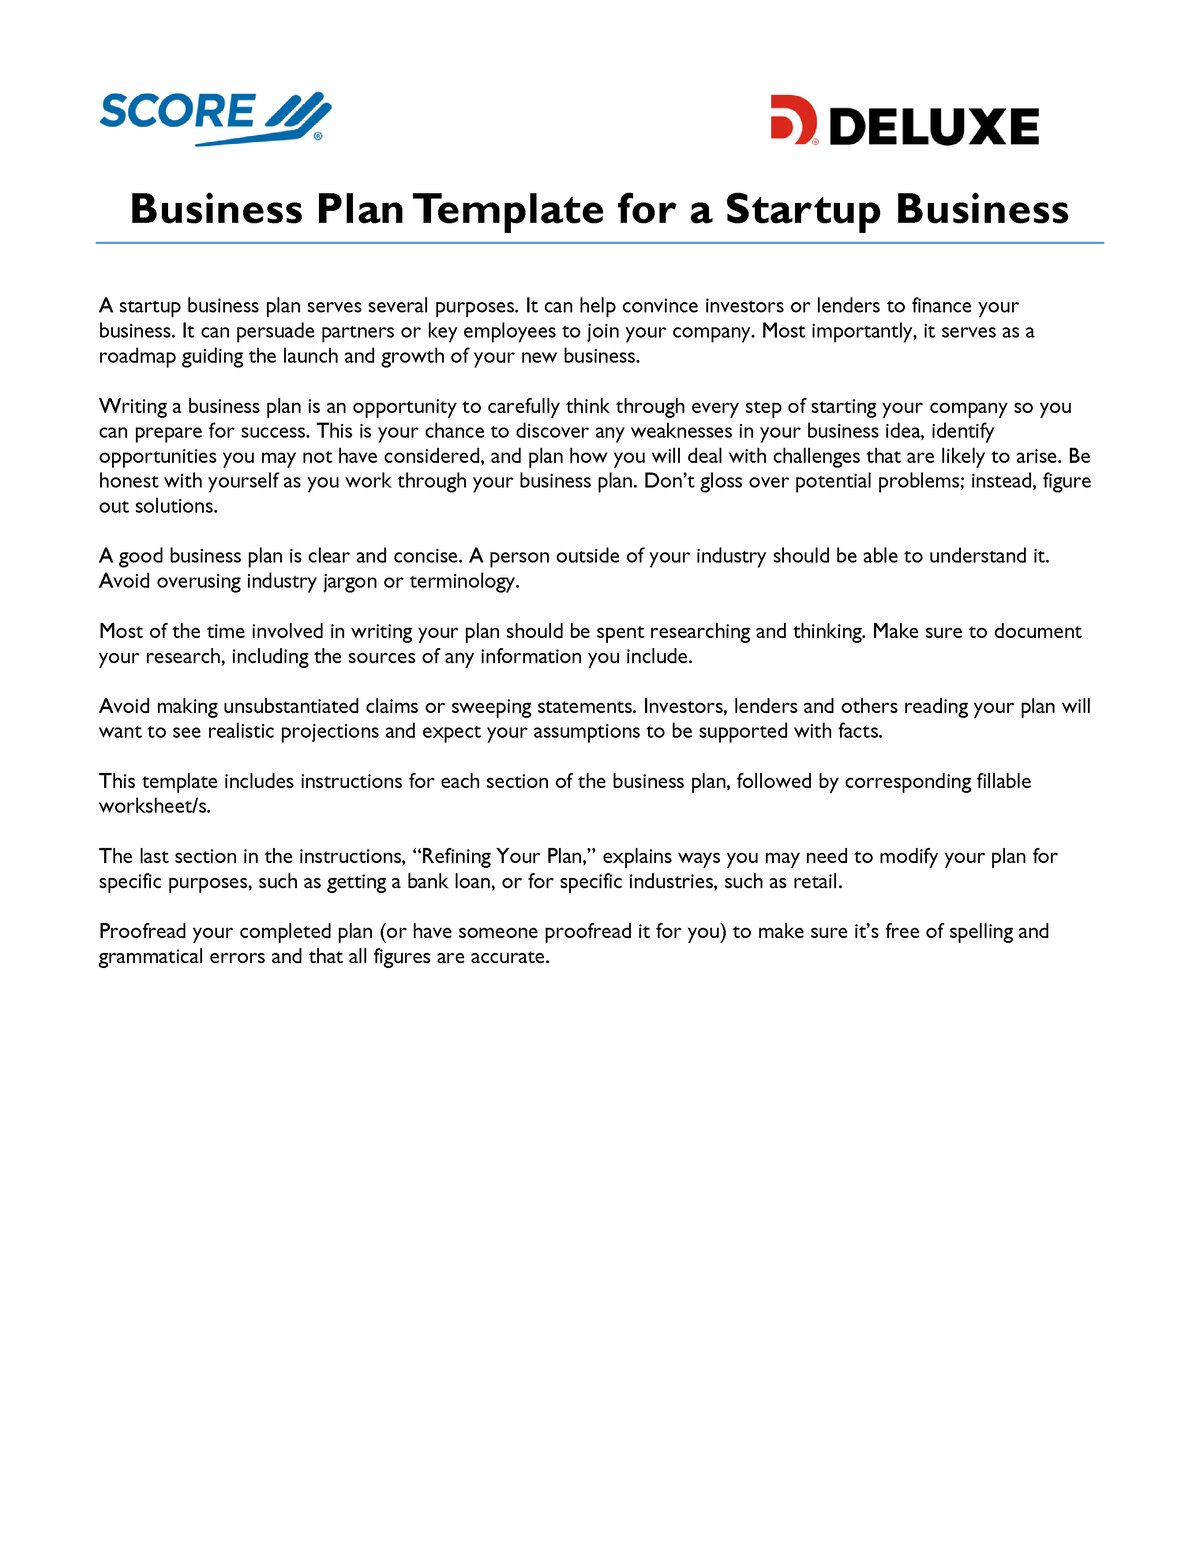 startup-business-plan-sample-business-plan-template-for-a-startup